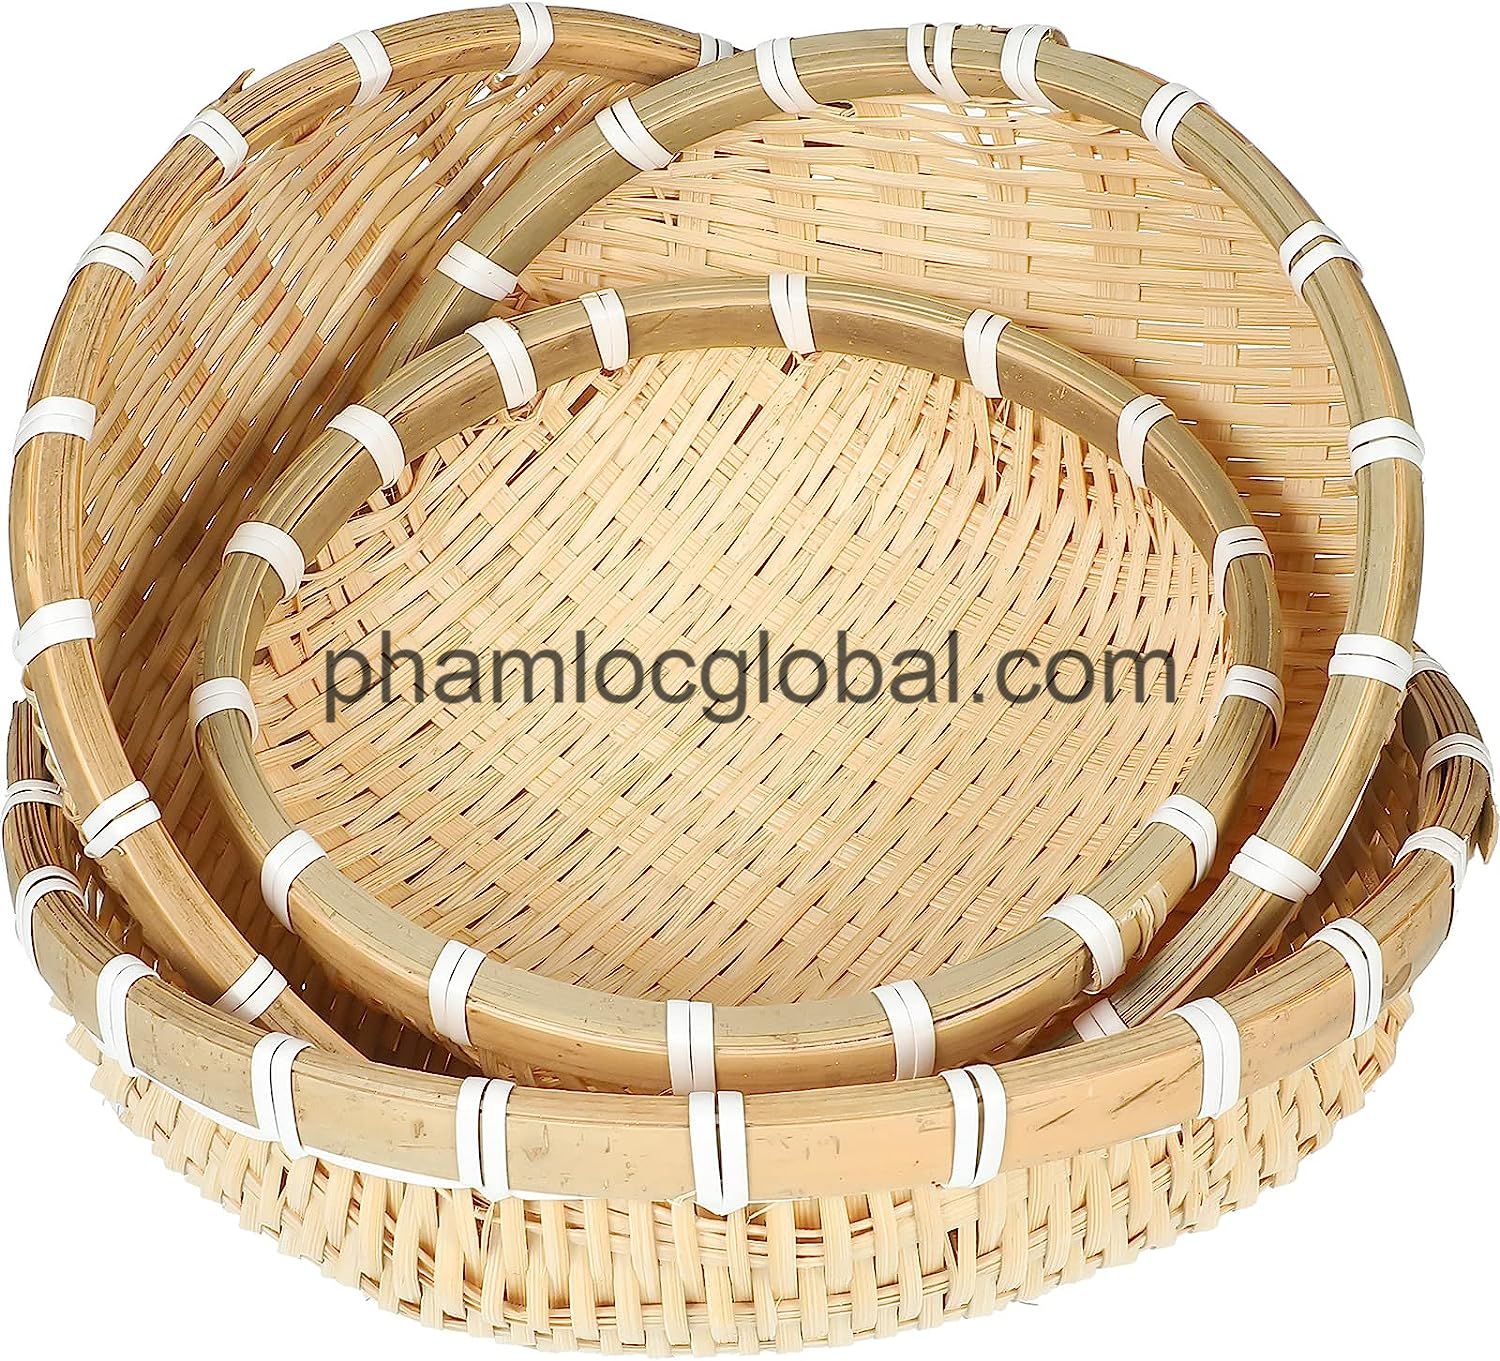 Bamboo hand-woven products